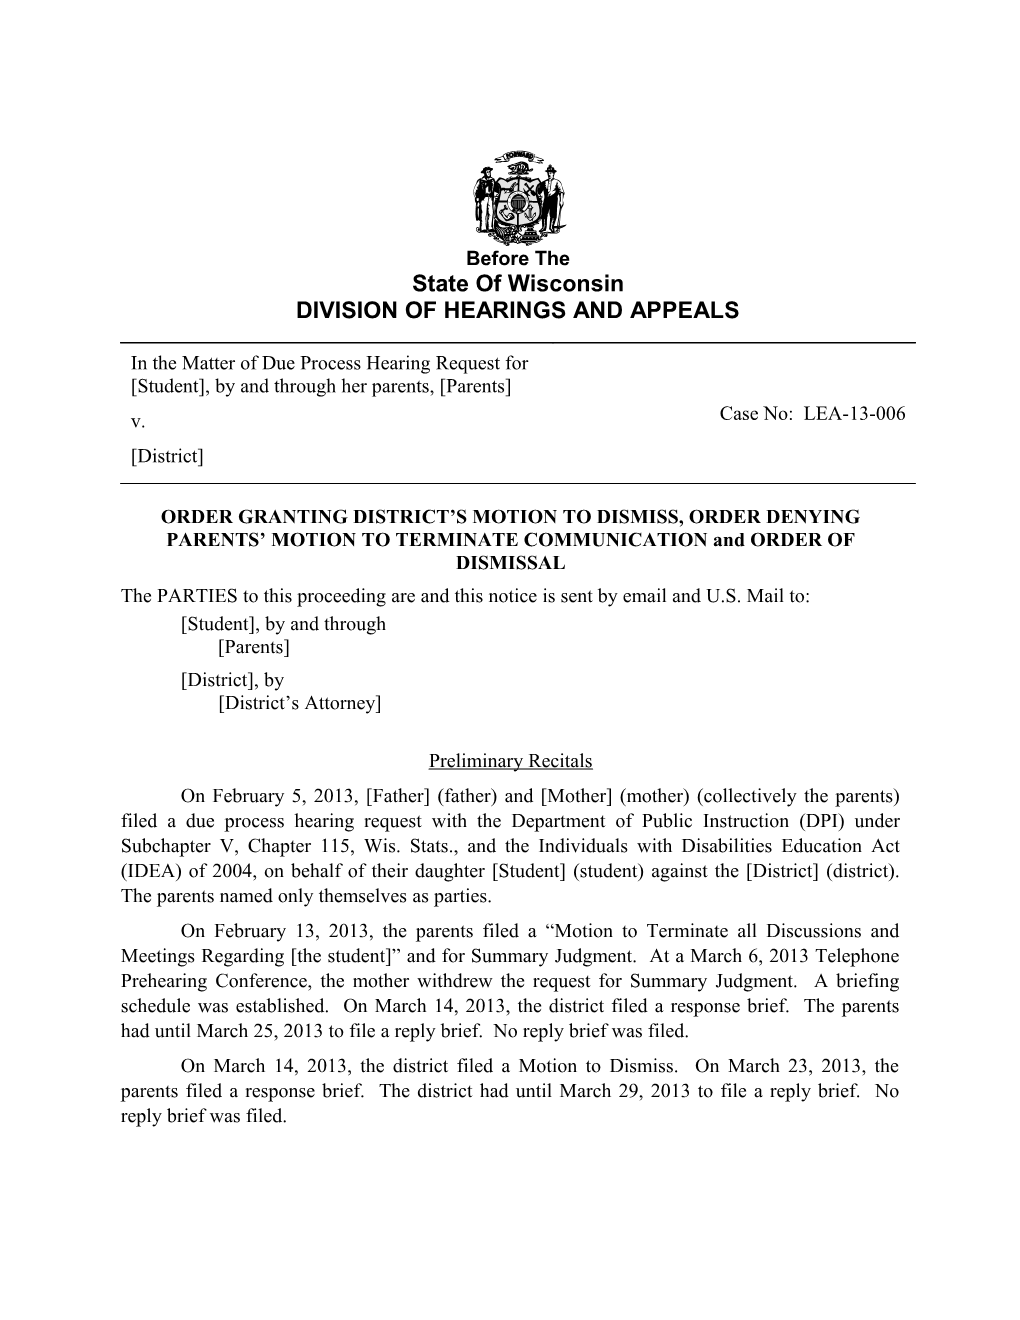 Order Granting District S Motion to Dismiss, Order Denying Parents Motion to Terminate